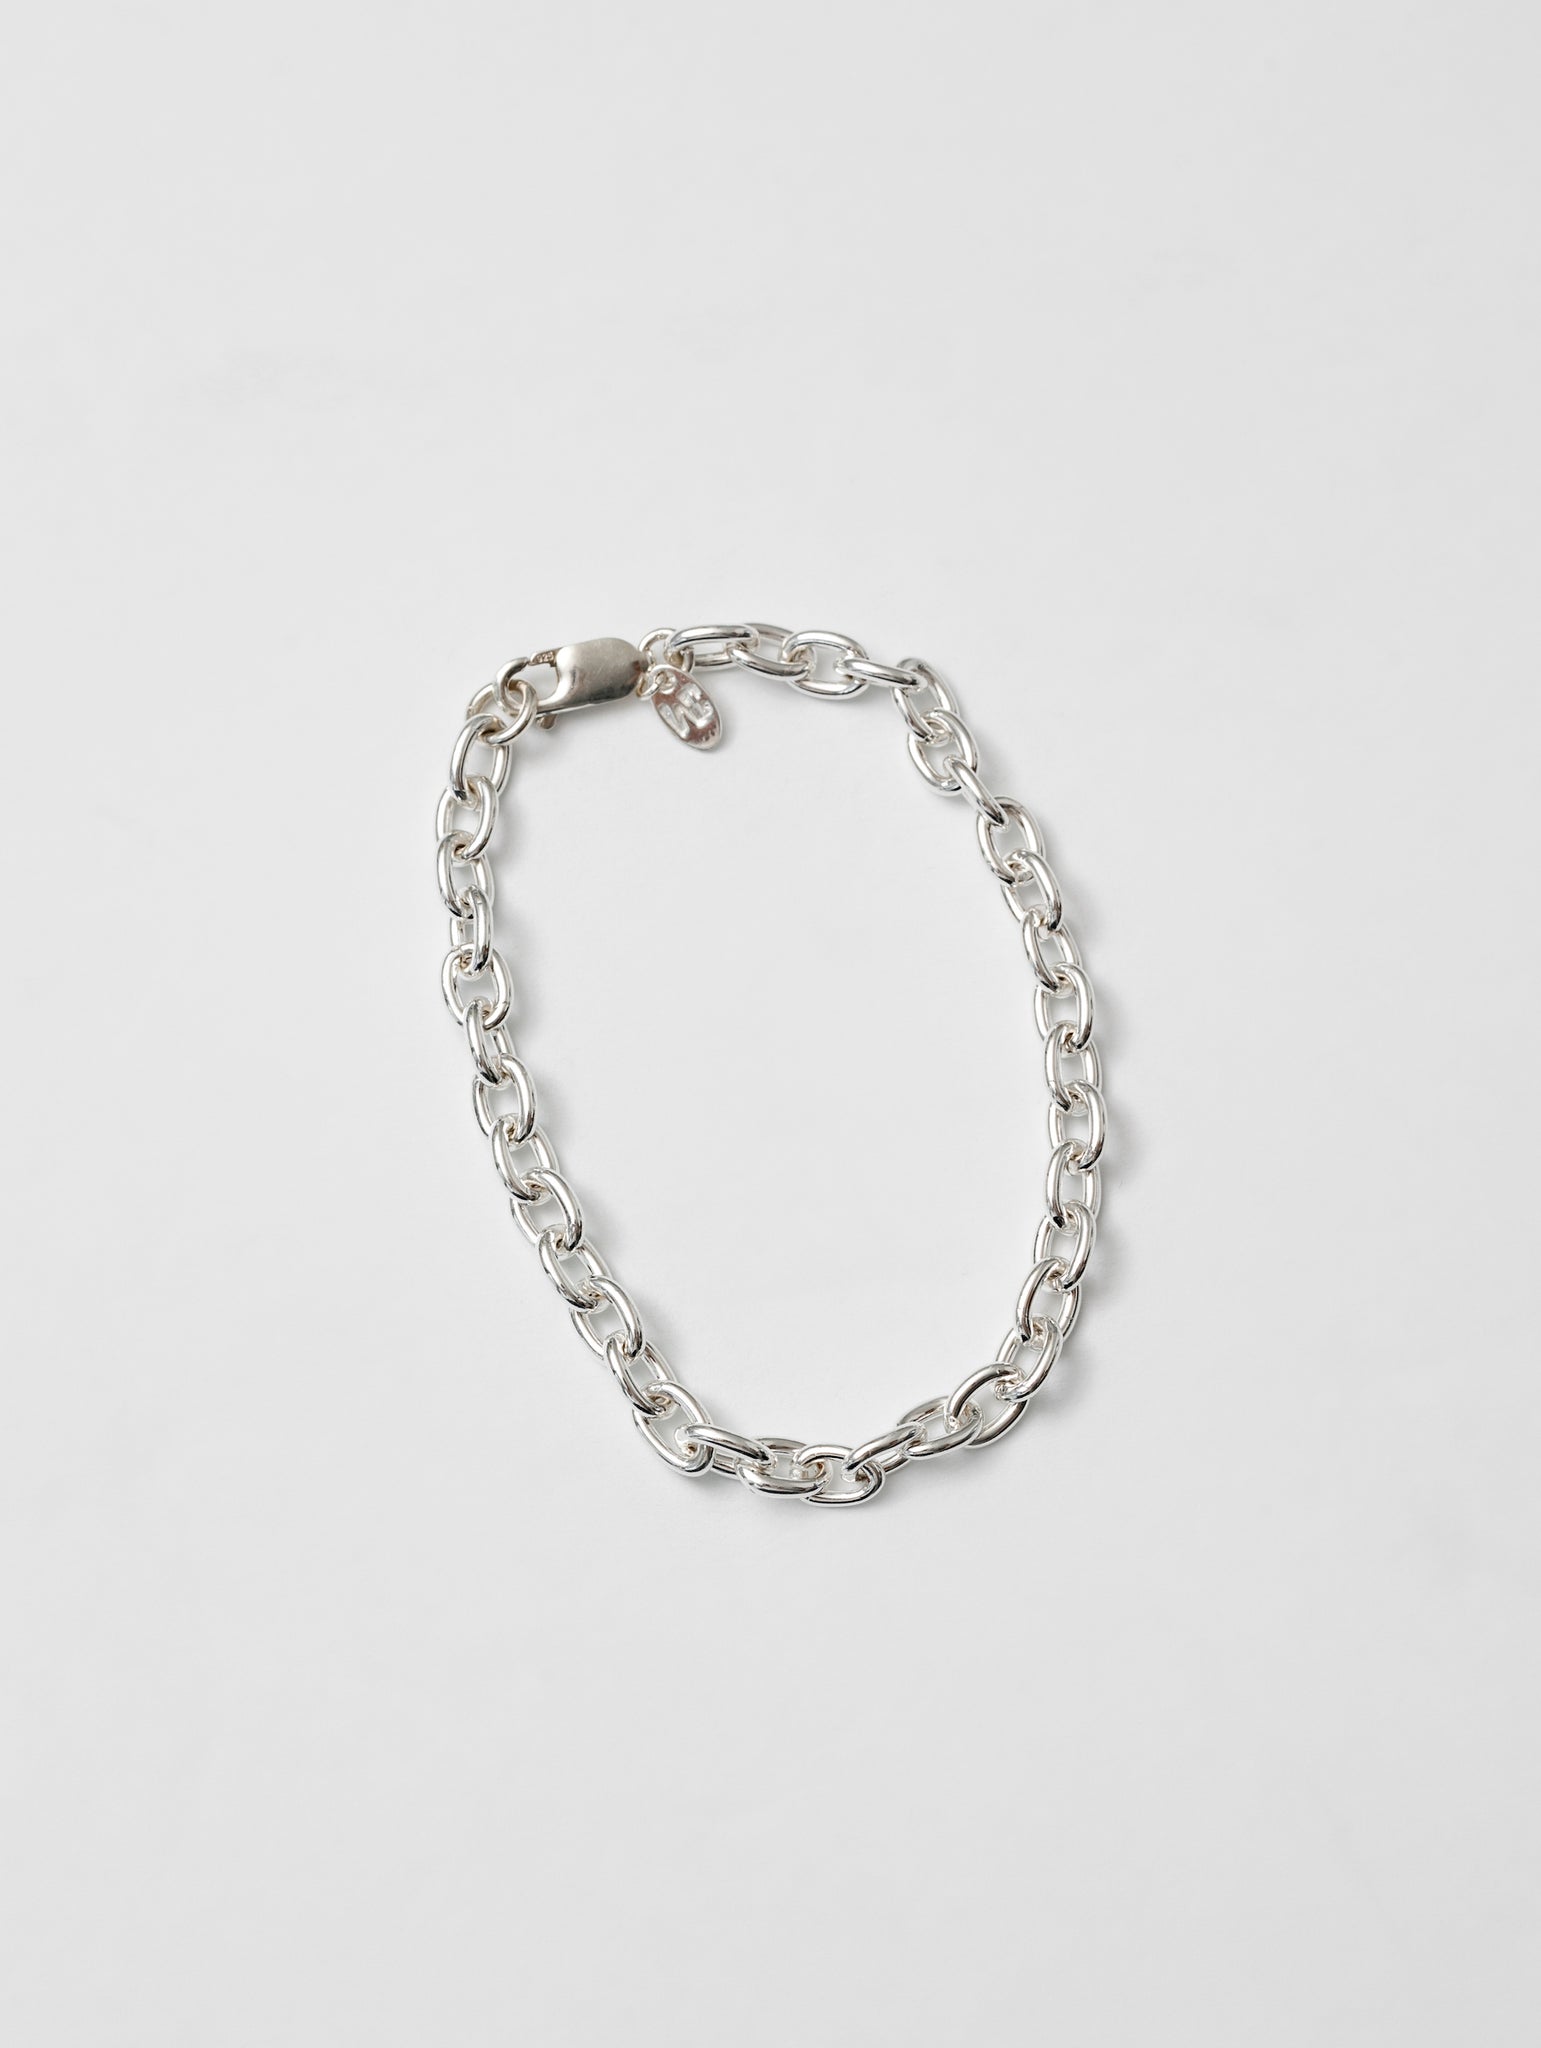 Wolf Circus Minimal Unisex Cable Chain Link Bracelet 925 Sterling Silver | Cohen Bracelet in Sterling Silver-Bracelets-wolfcircus.com